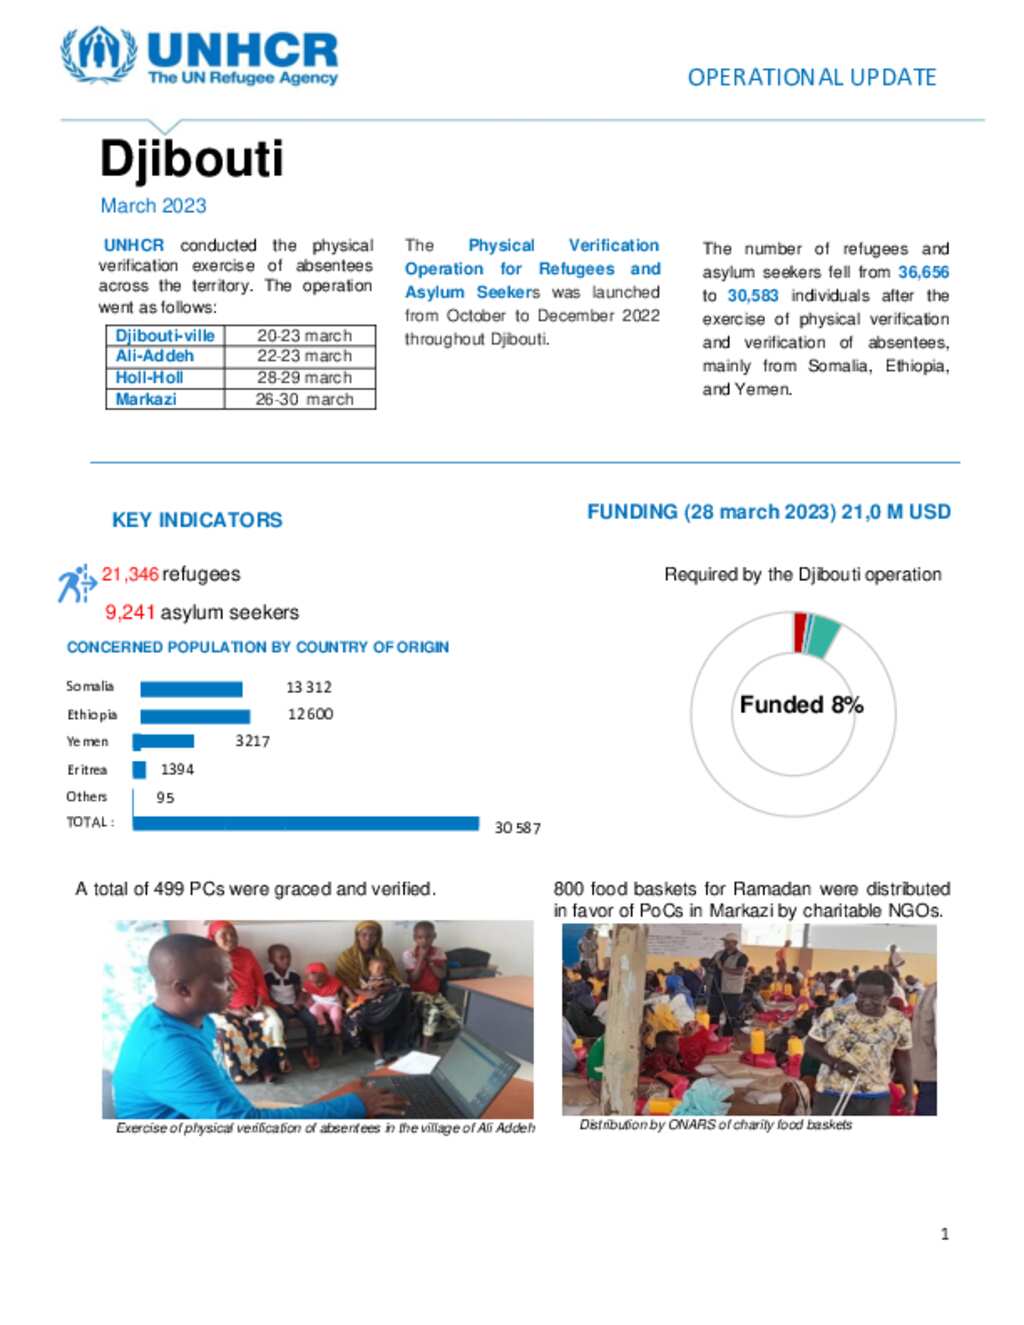 Document - Djibouti Operational Update: March 2023 [ENG]